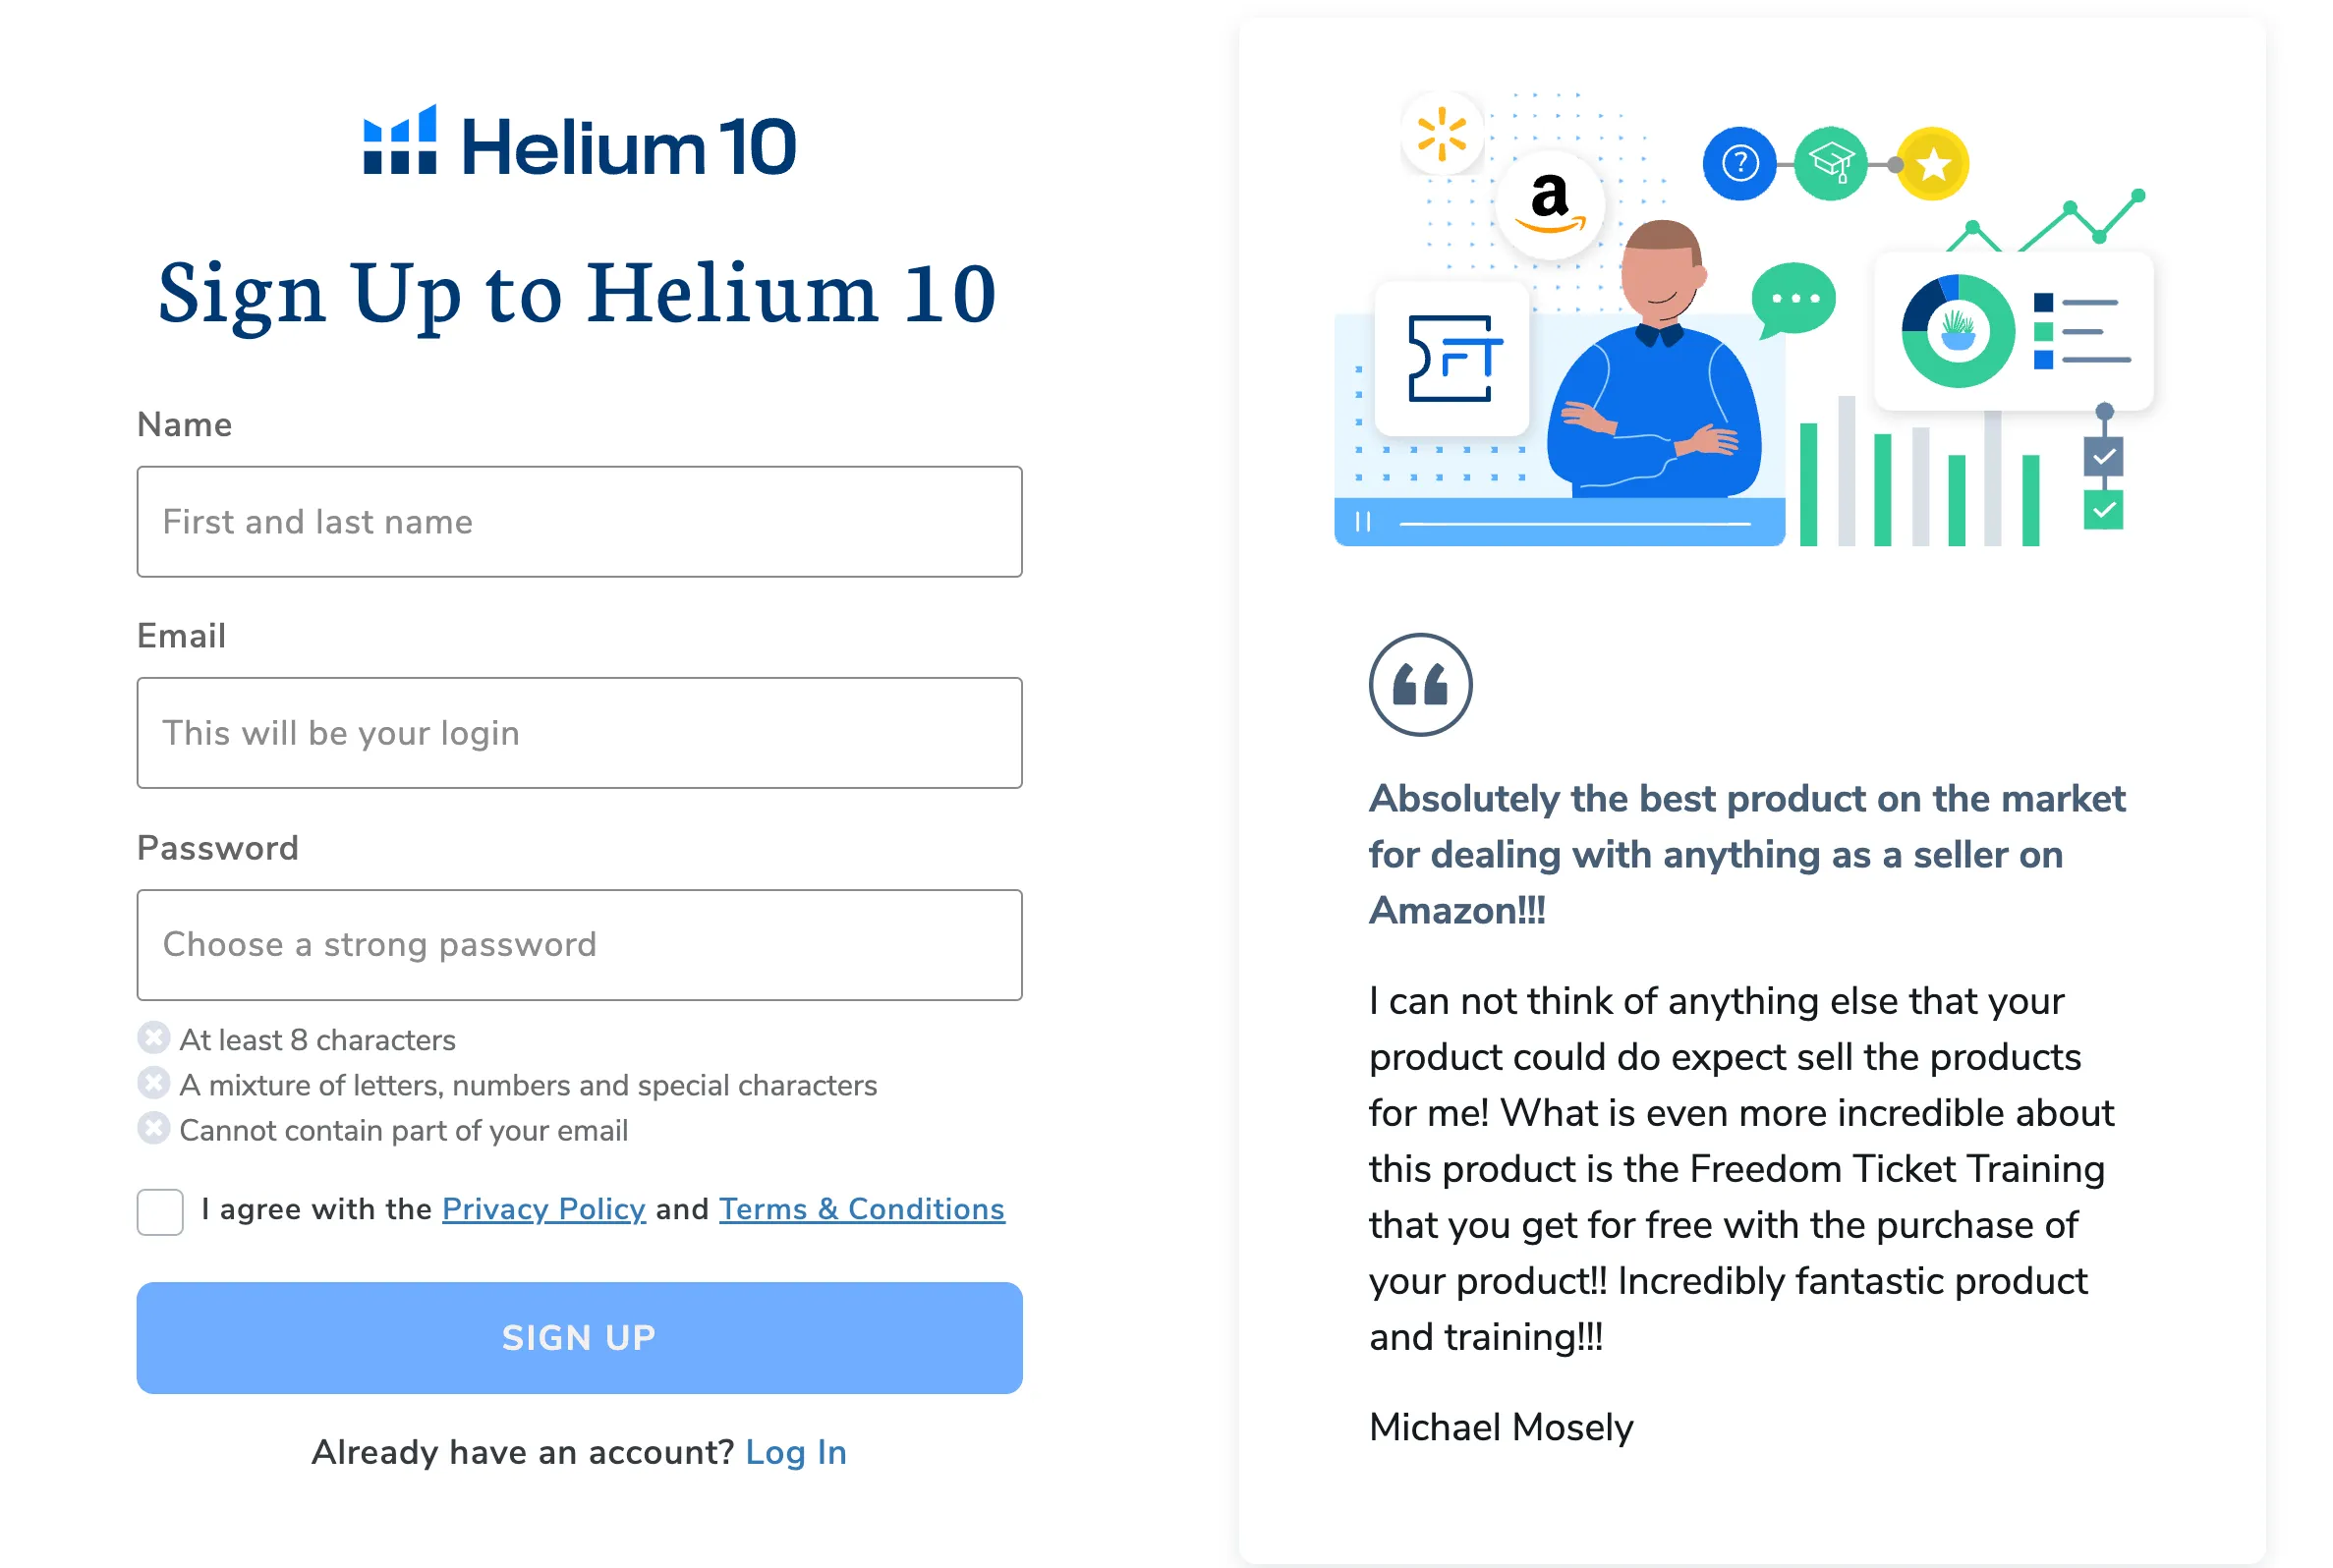 Sign Up to Helium 10